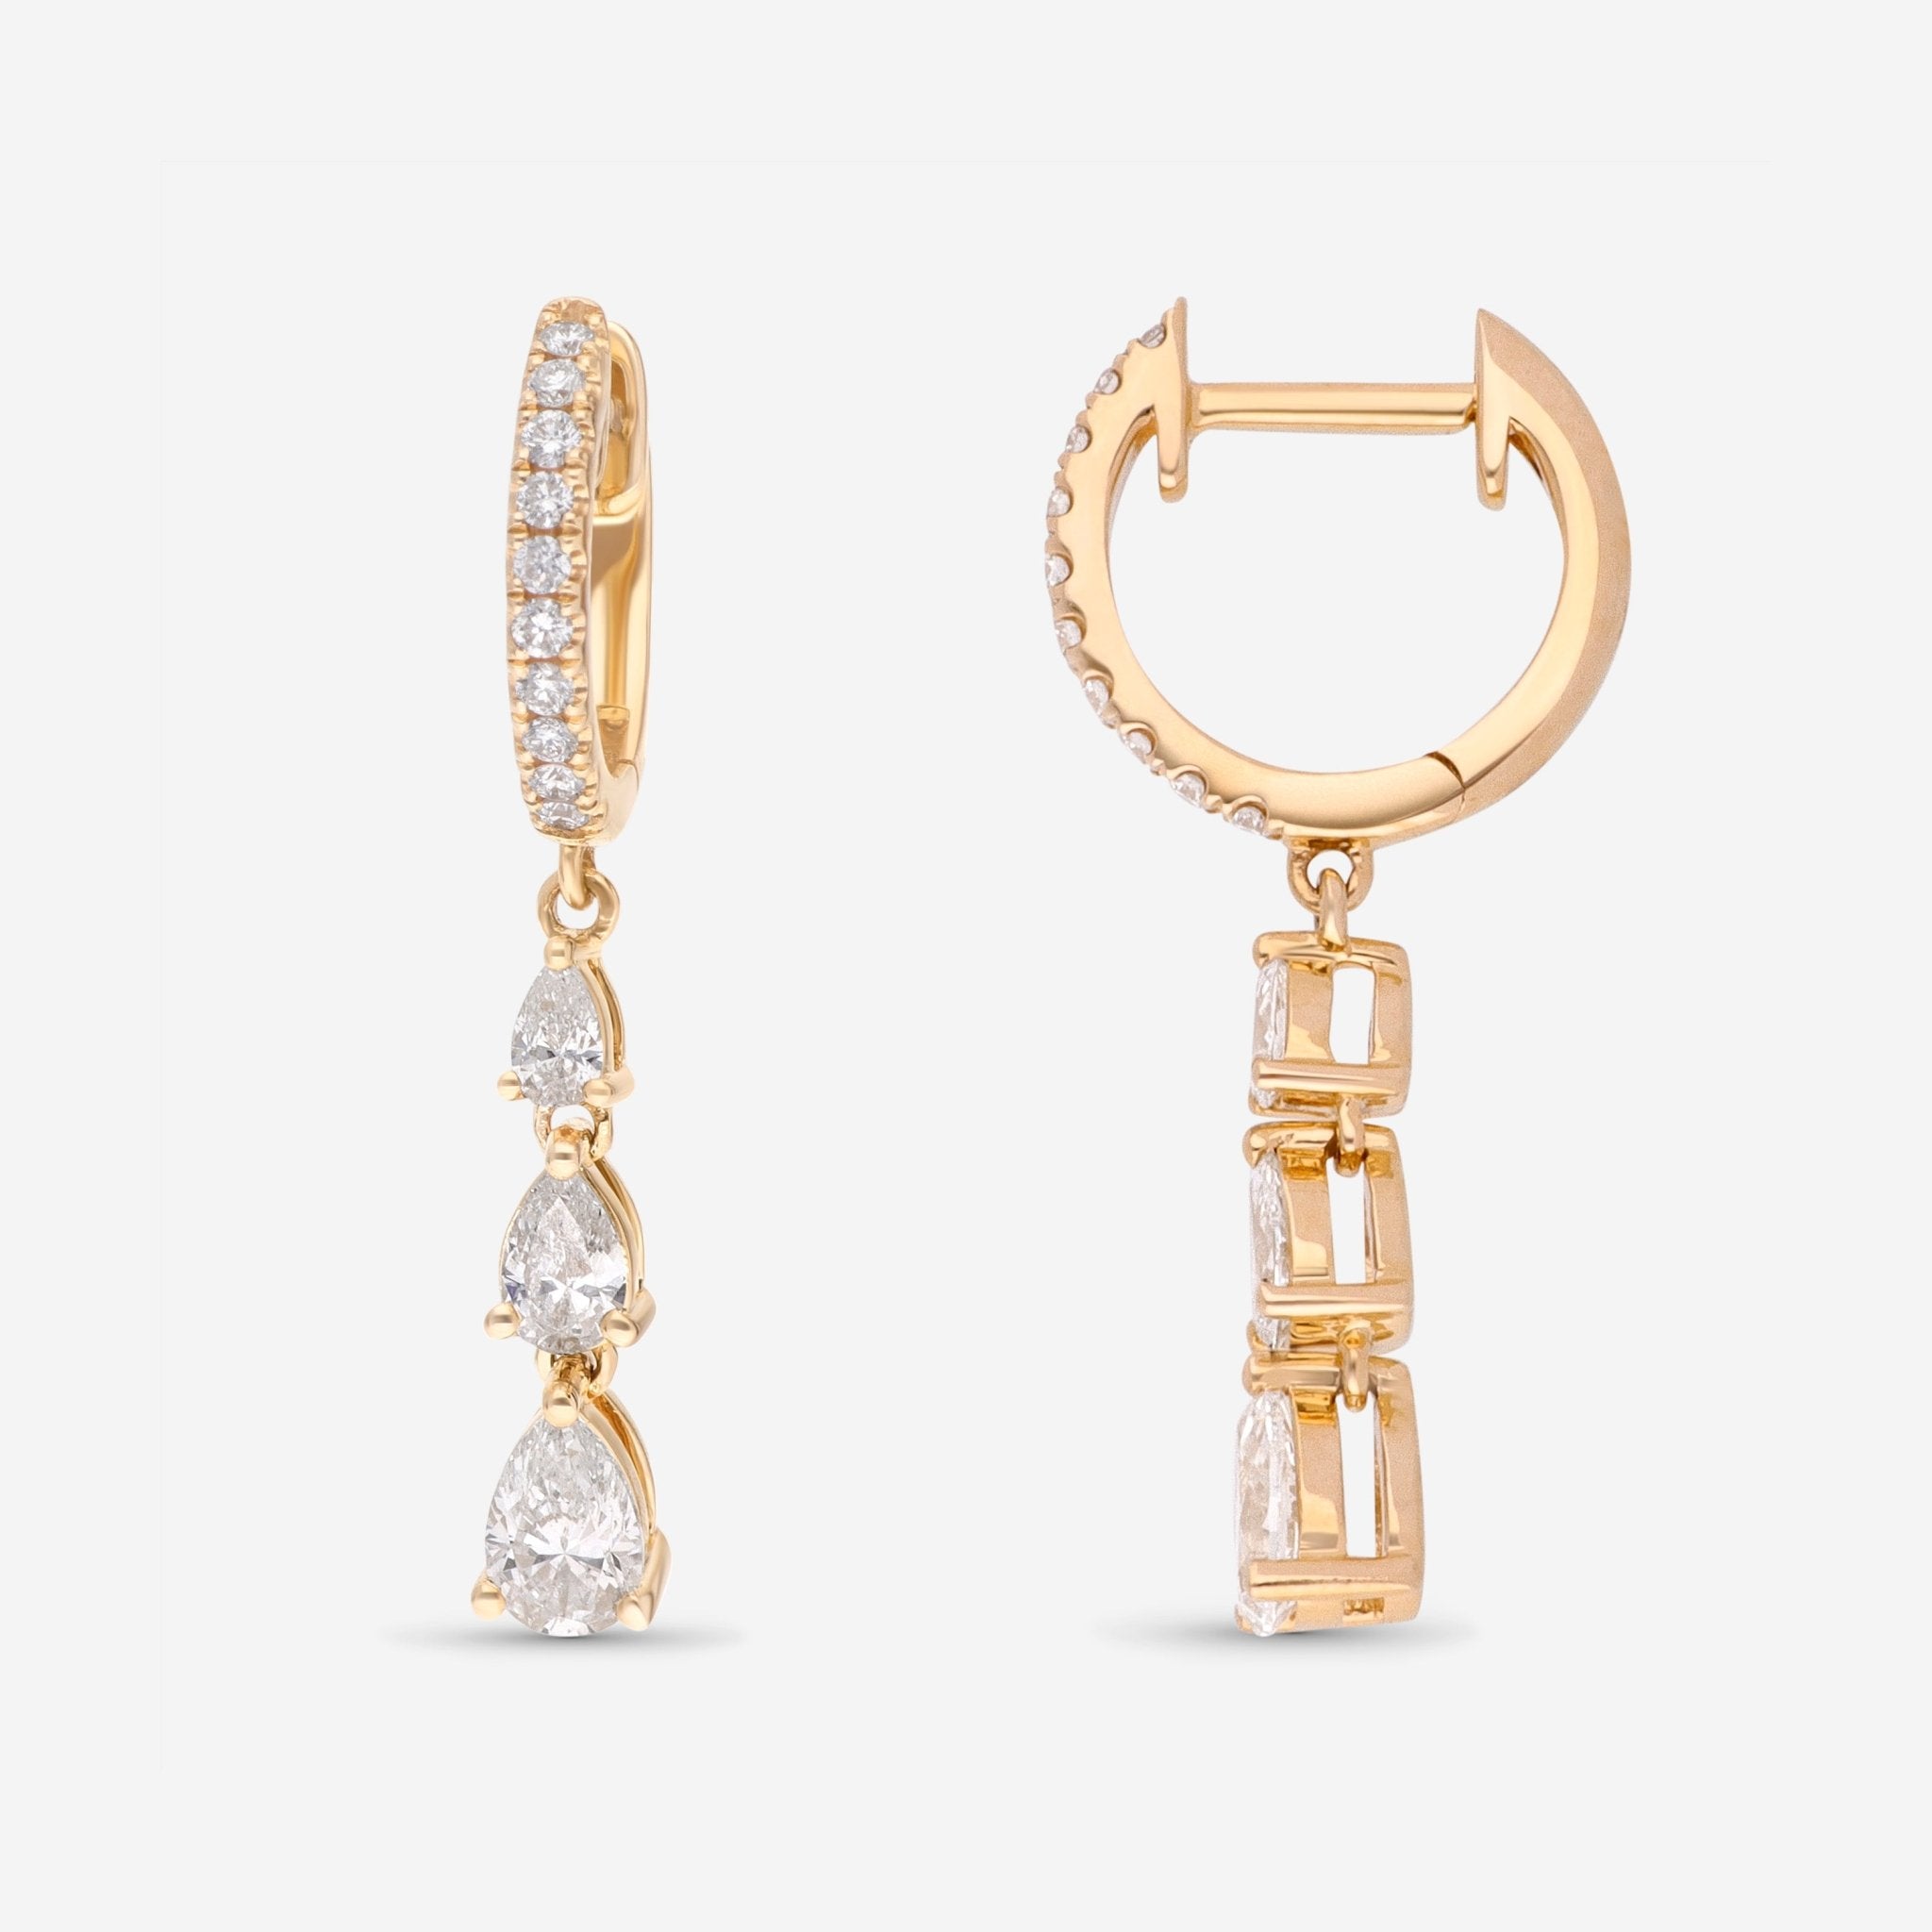 Ina Mar 14K Yellow Gold, Pear and Round Shaped Diamond 0.95ct. tw. Drop Earrings IMKGK29 - THE SOLIST - Ina Mar